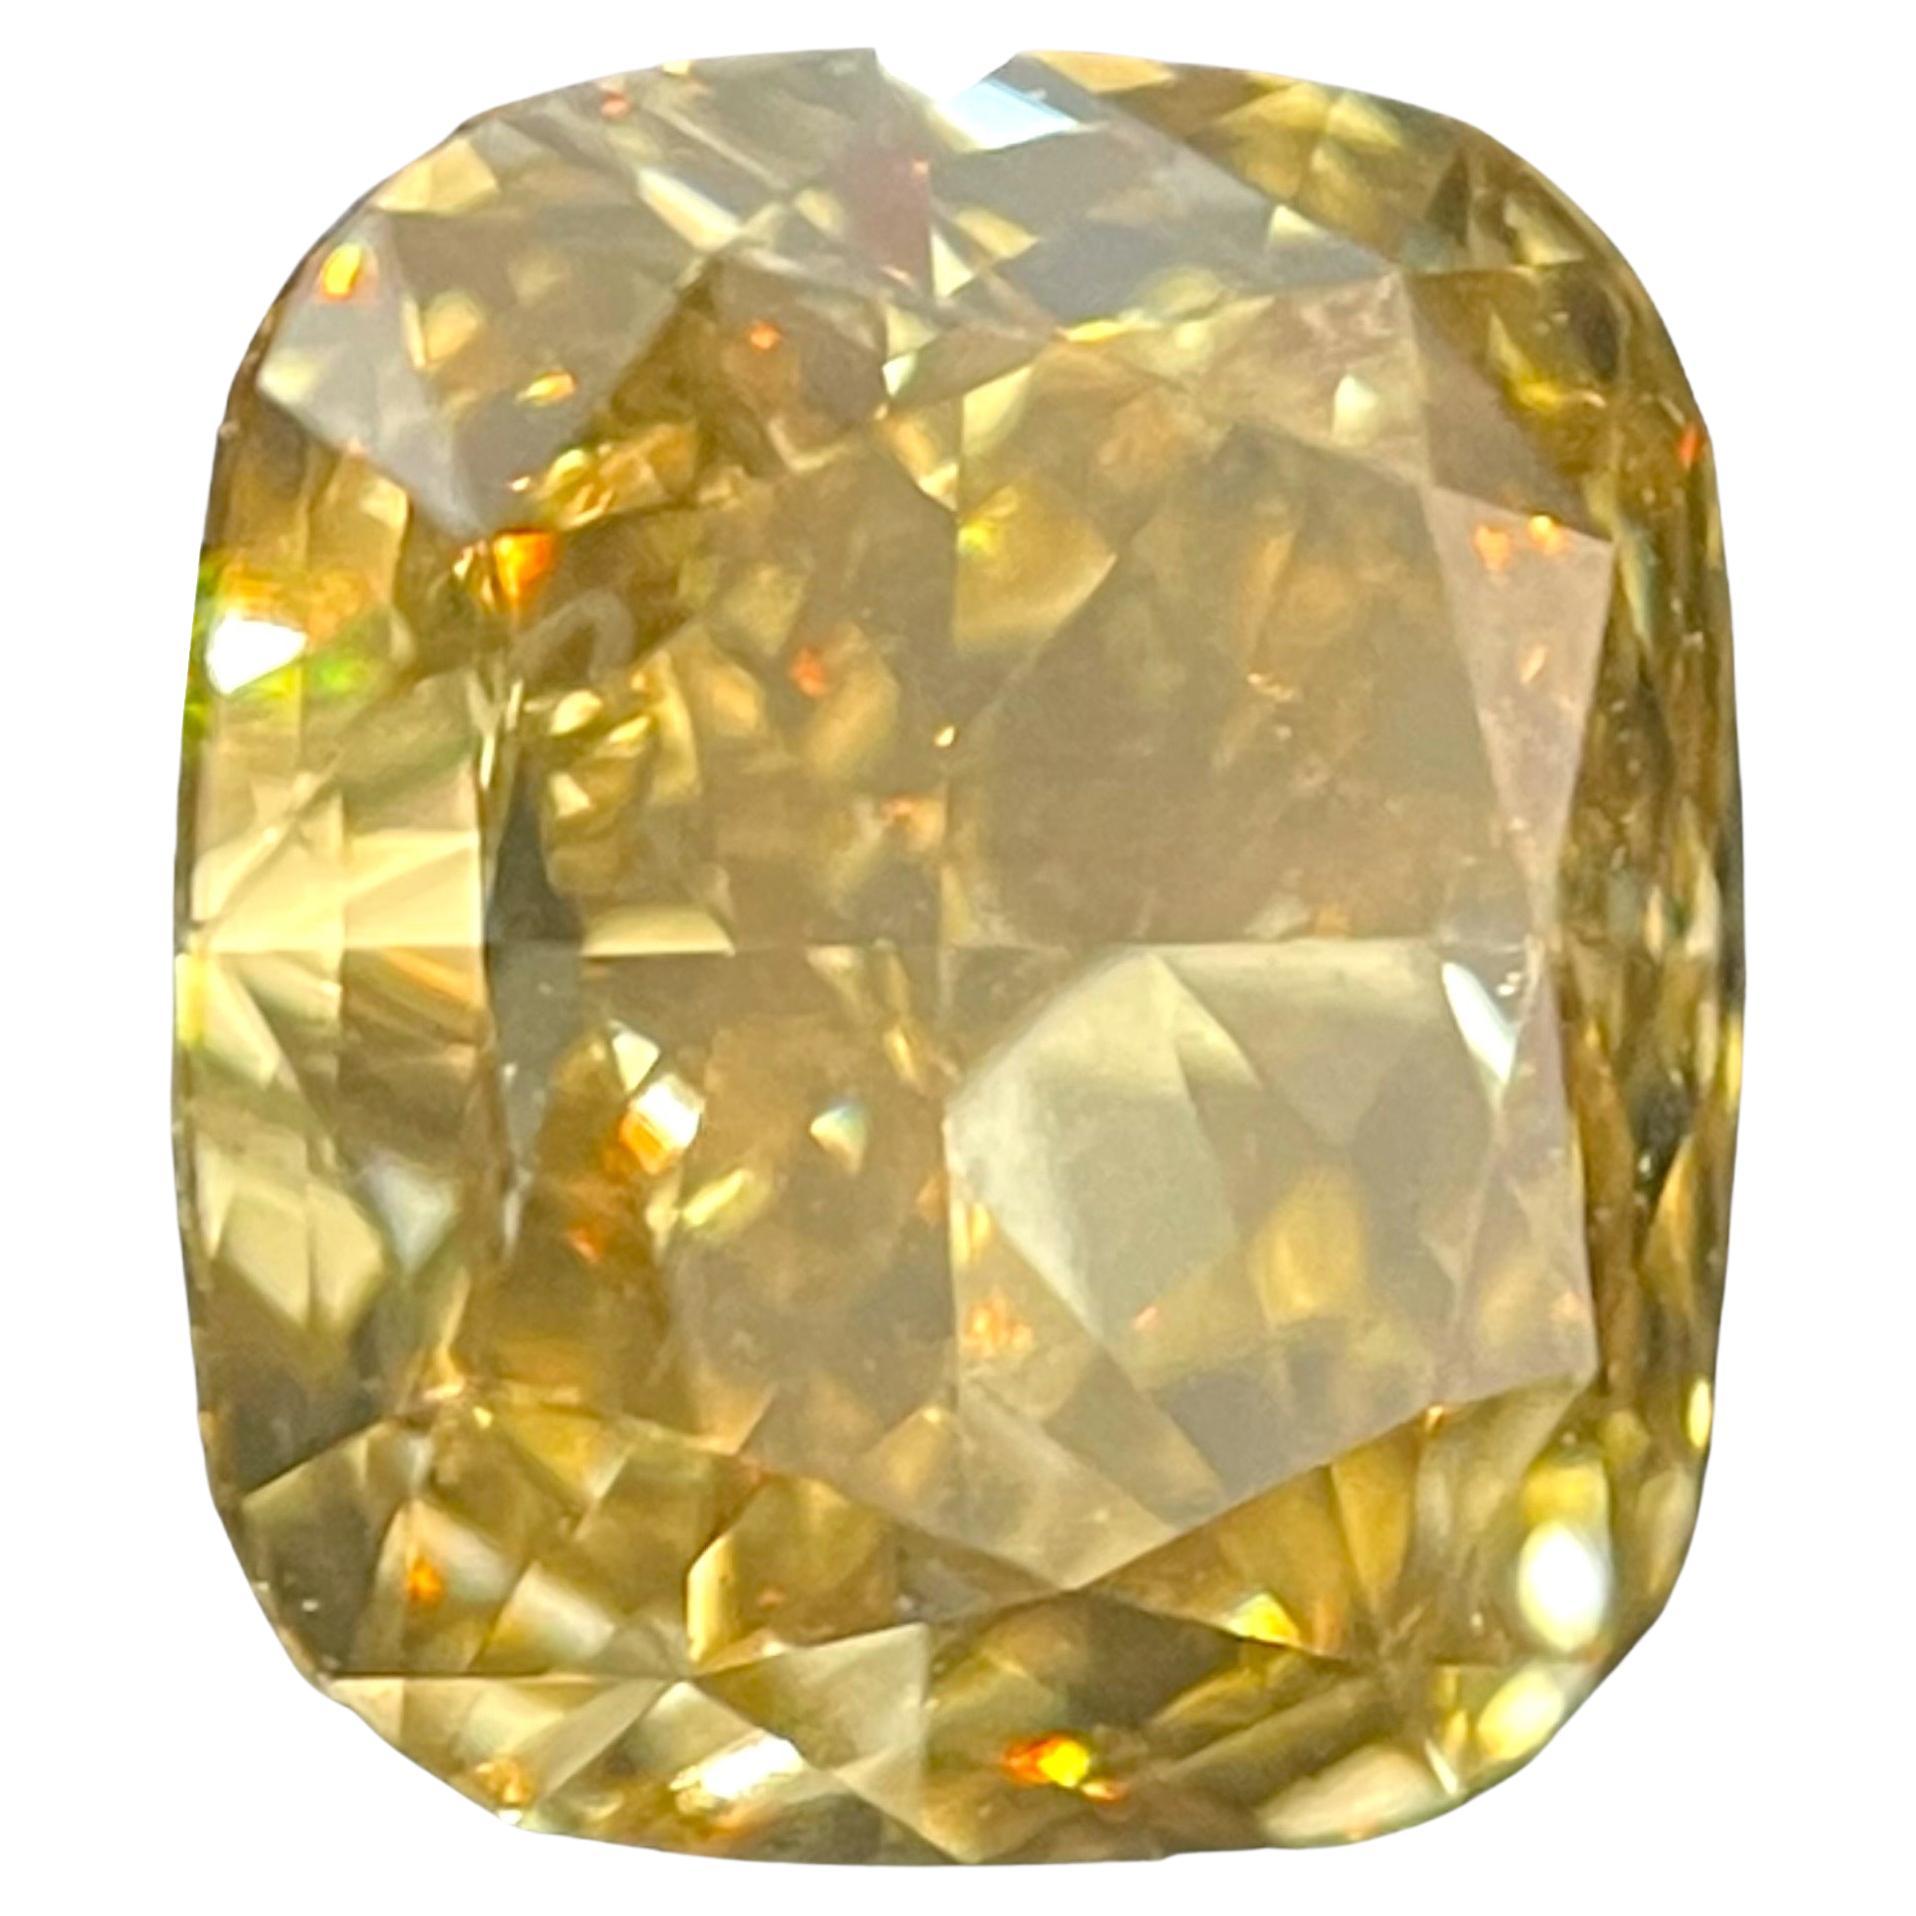 1.06 Carat Cushion Brilliant Gia Certified Fancy Dark Brown-Yellow Vvs2 Clarity For Sale